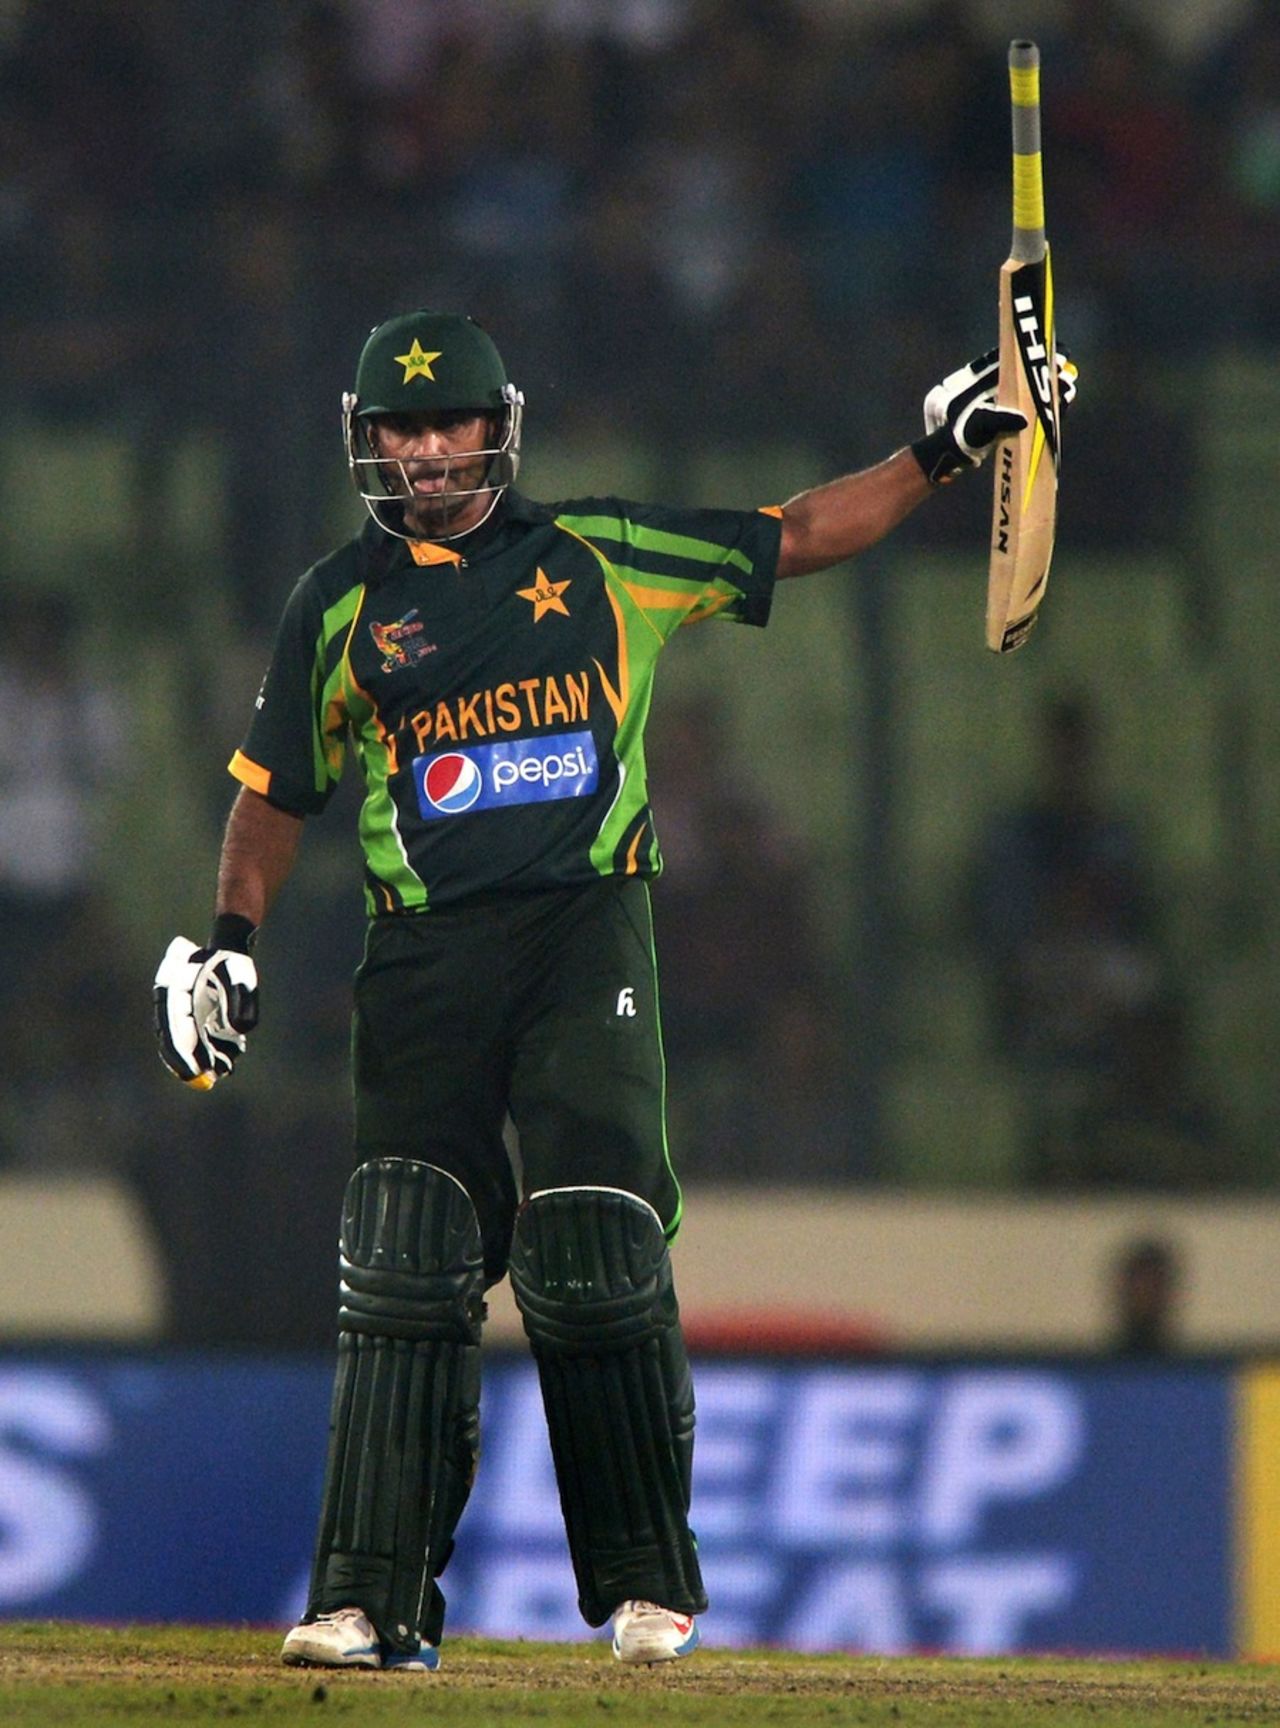 Mohammad Hafeez gestures after his half-century, India v Pakistan, Asia Cup, Mirpur, March 2, 2014